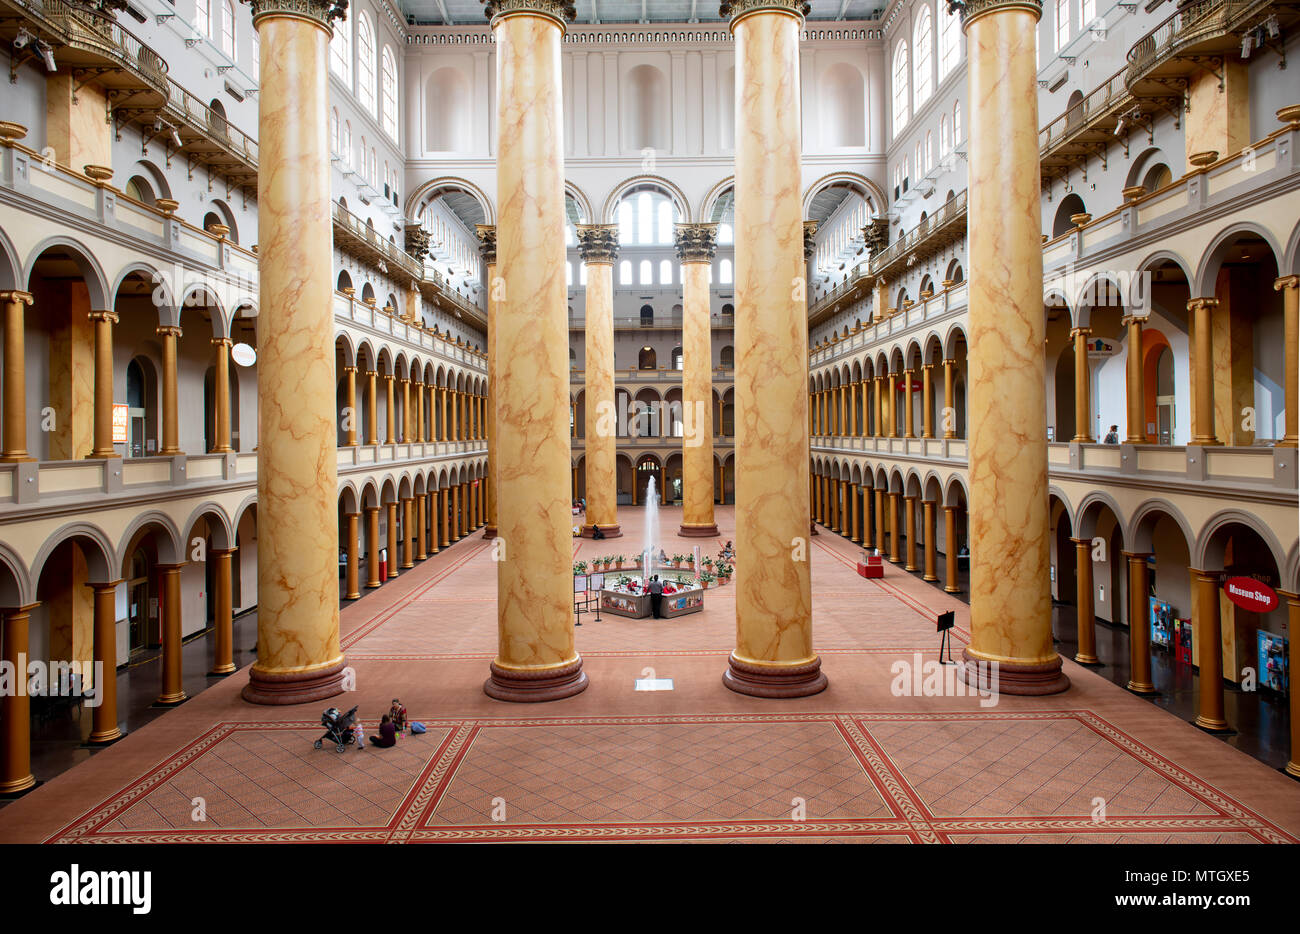 USA Washington DC D.C. The National Building Museum interior of the Great Hall Stock Photo